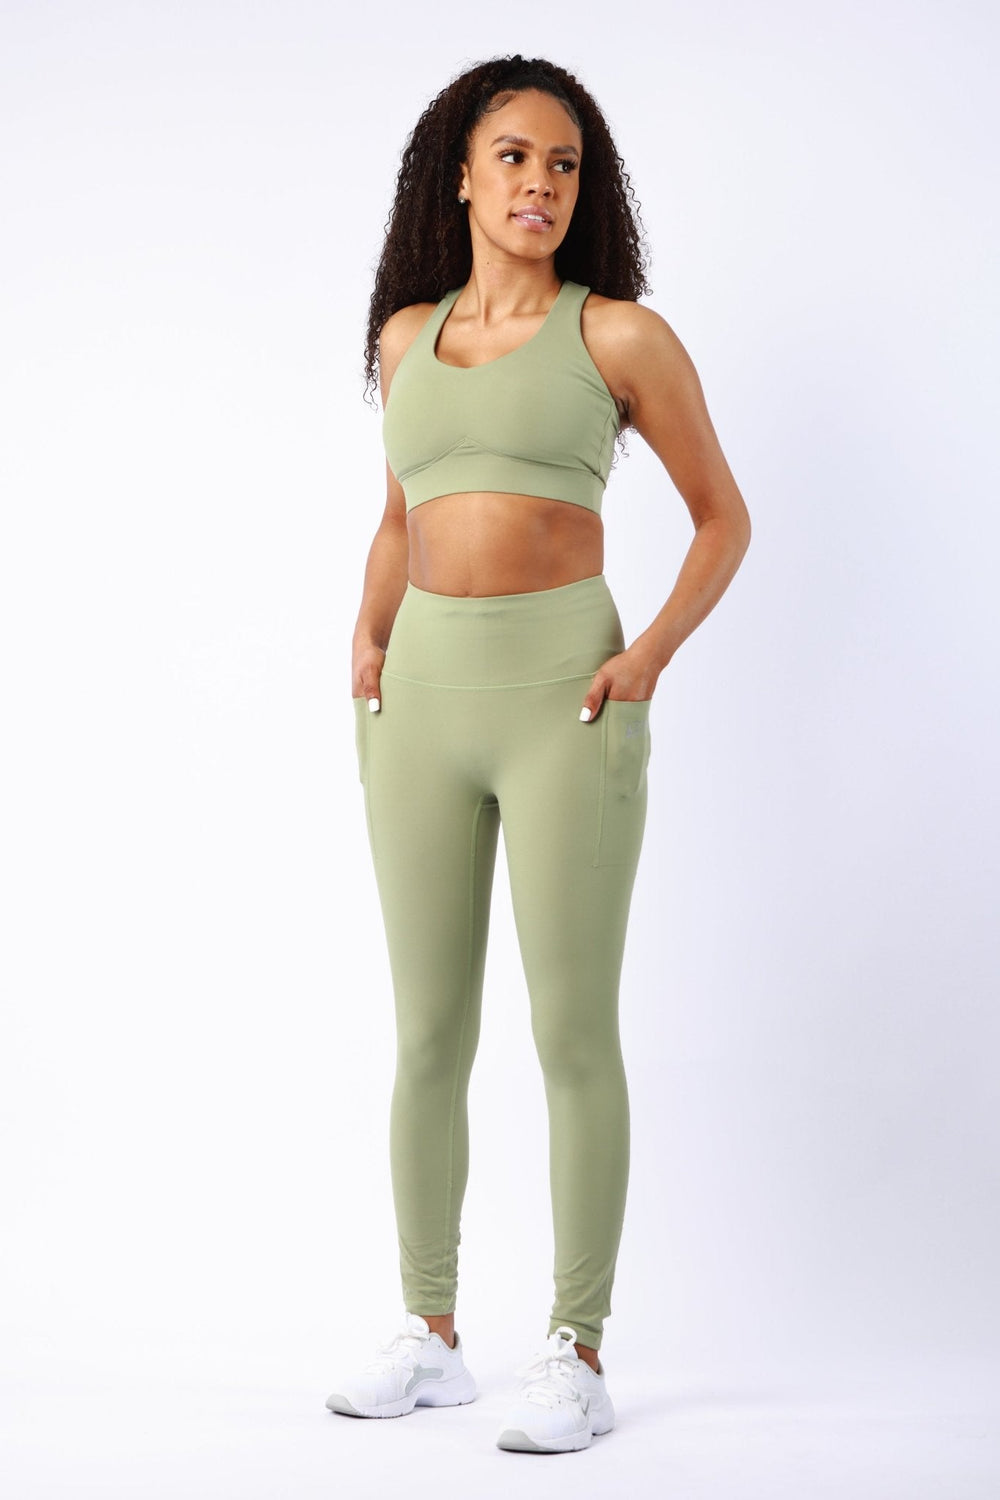 Athletic Women's Leggings With Pockets In Oil Green - attivousa Free Shipping over $75 Womens Activewear Attivo